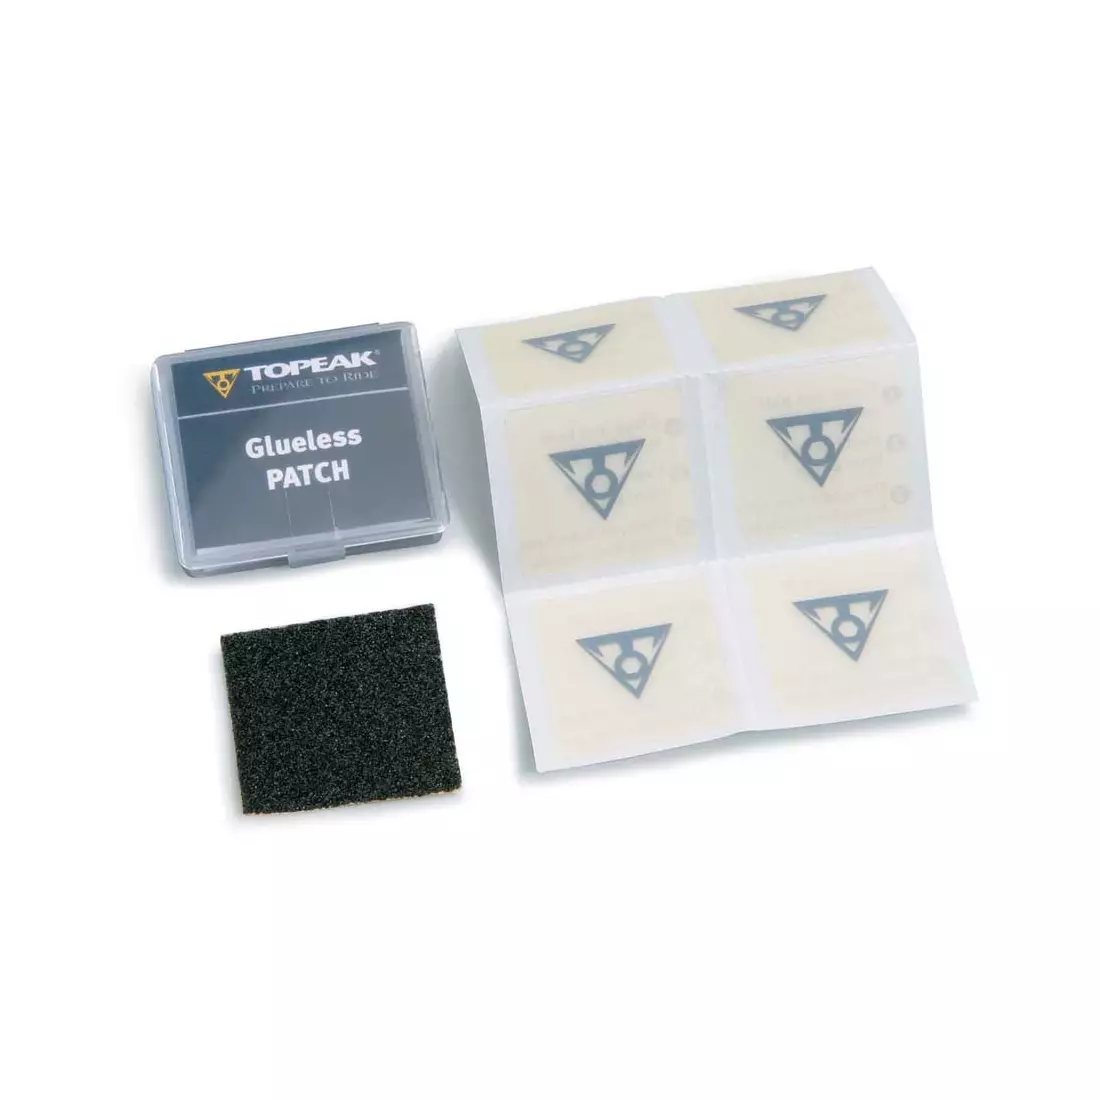 TOPEAK SELF-ADHESIVE PATCHES FLYPAPER GLUELESS PATCH KIT T-TGP01